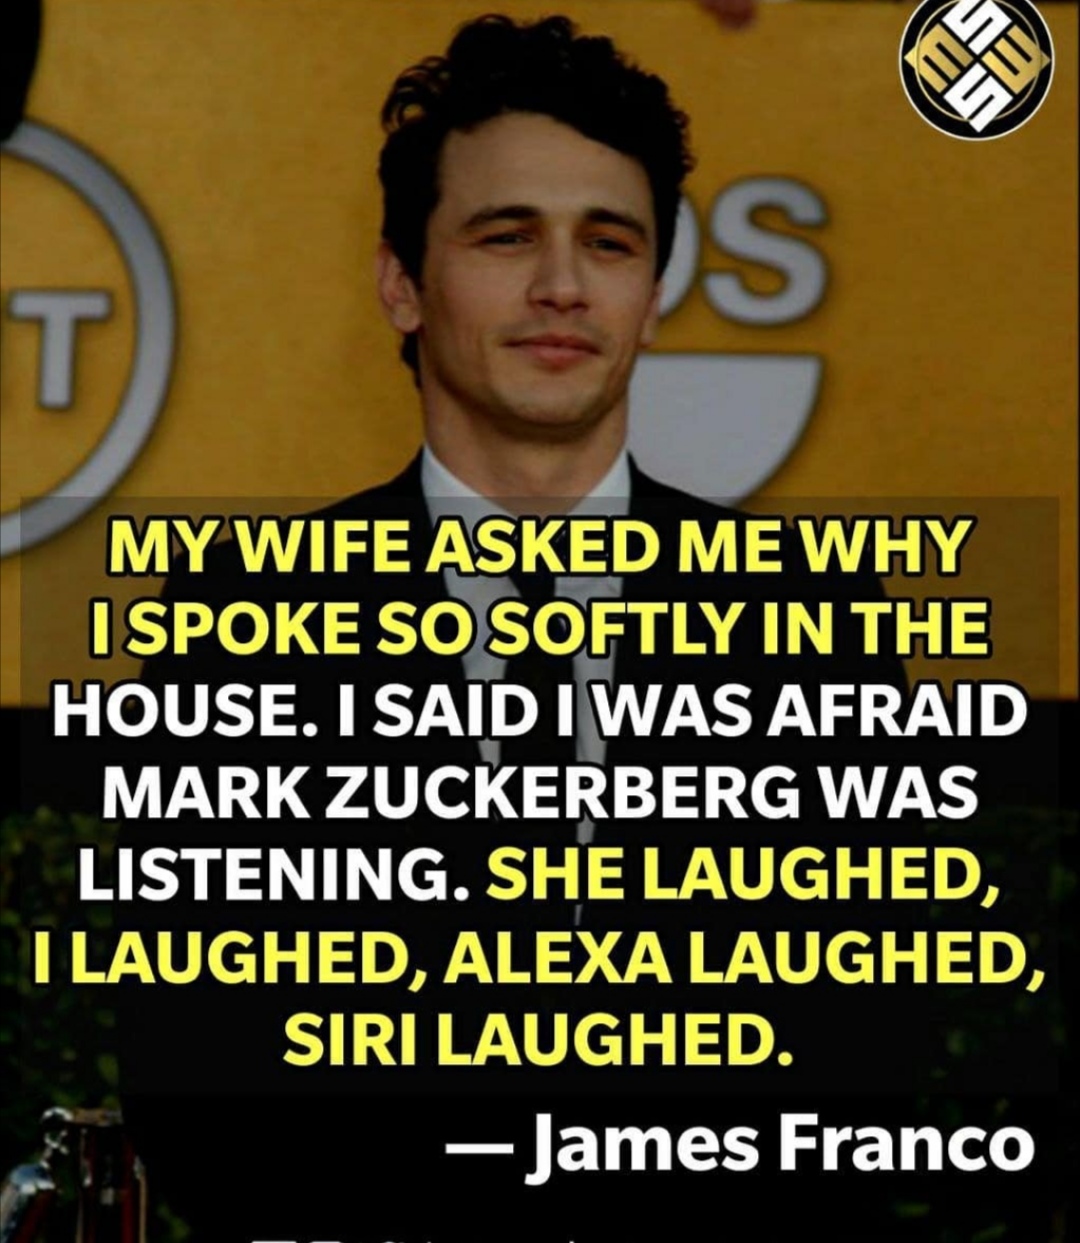 photo caption - Ei Is T My Wife Asked Me Why I Spoke So Softly In The House. I Said I Was Afraid Mark Zuckerberg Was Listening. She Laughed, I Laughed, Alexa Laughed, Siri Laughed. James Franco